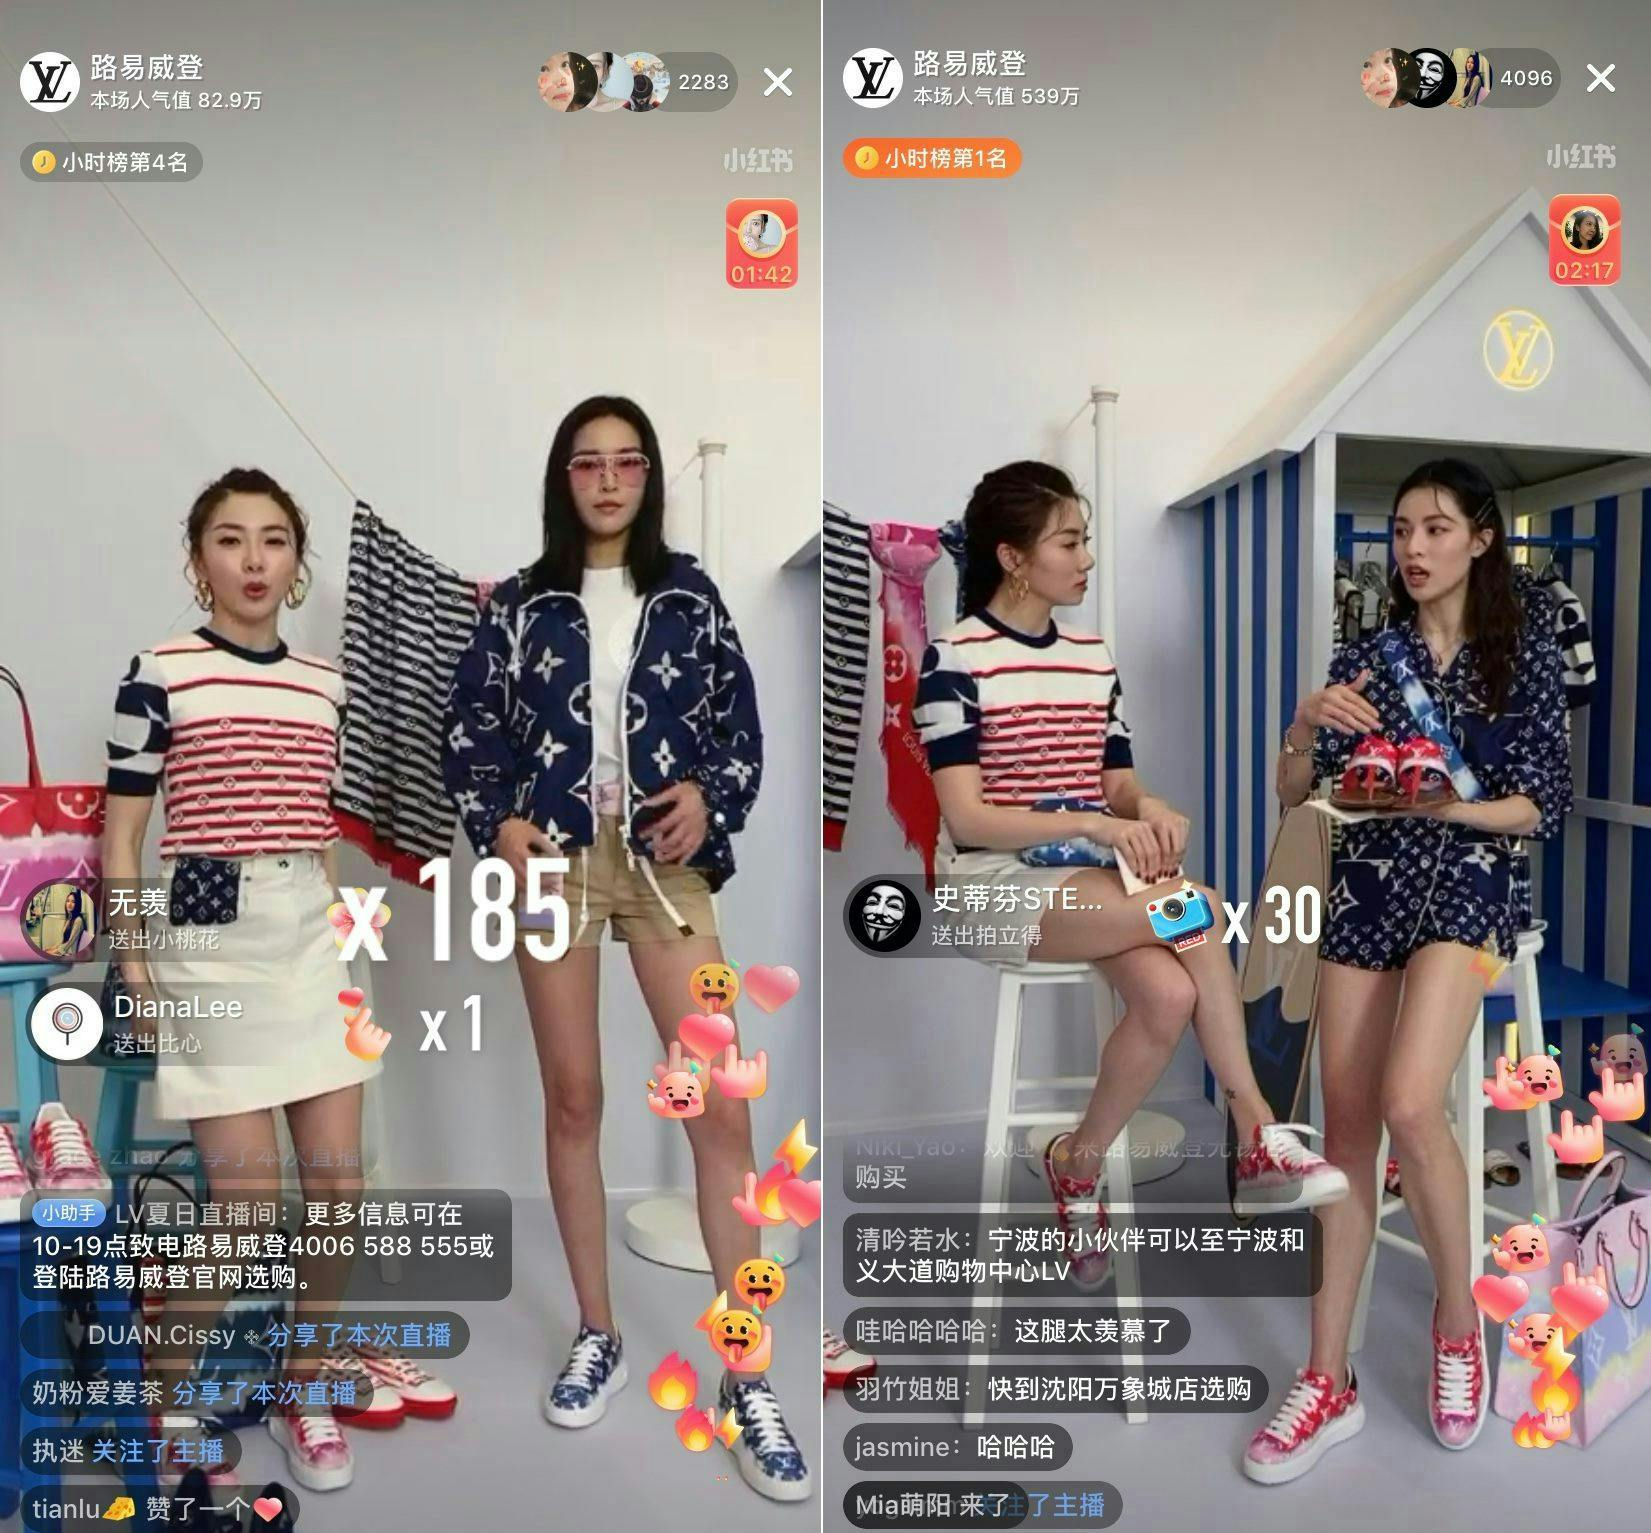 A screenshot of Louis Vuitton's live stream event on Chinese social app Little Red Book